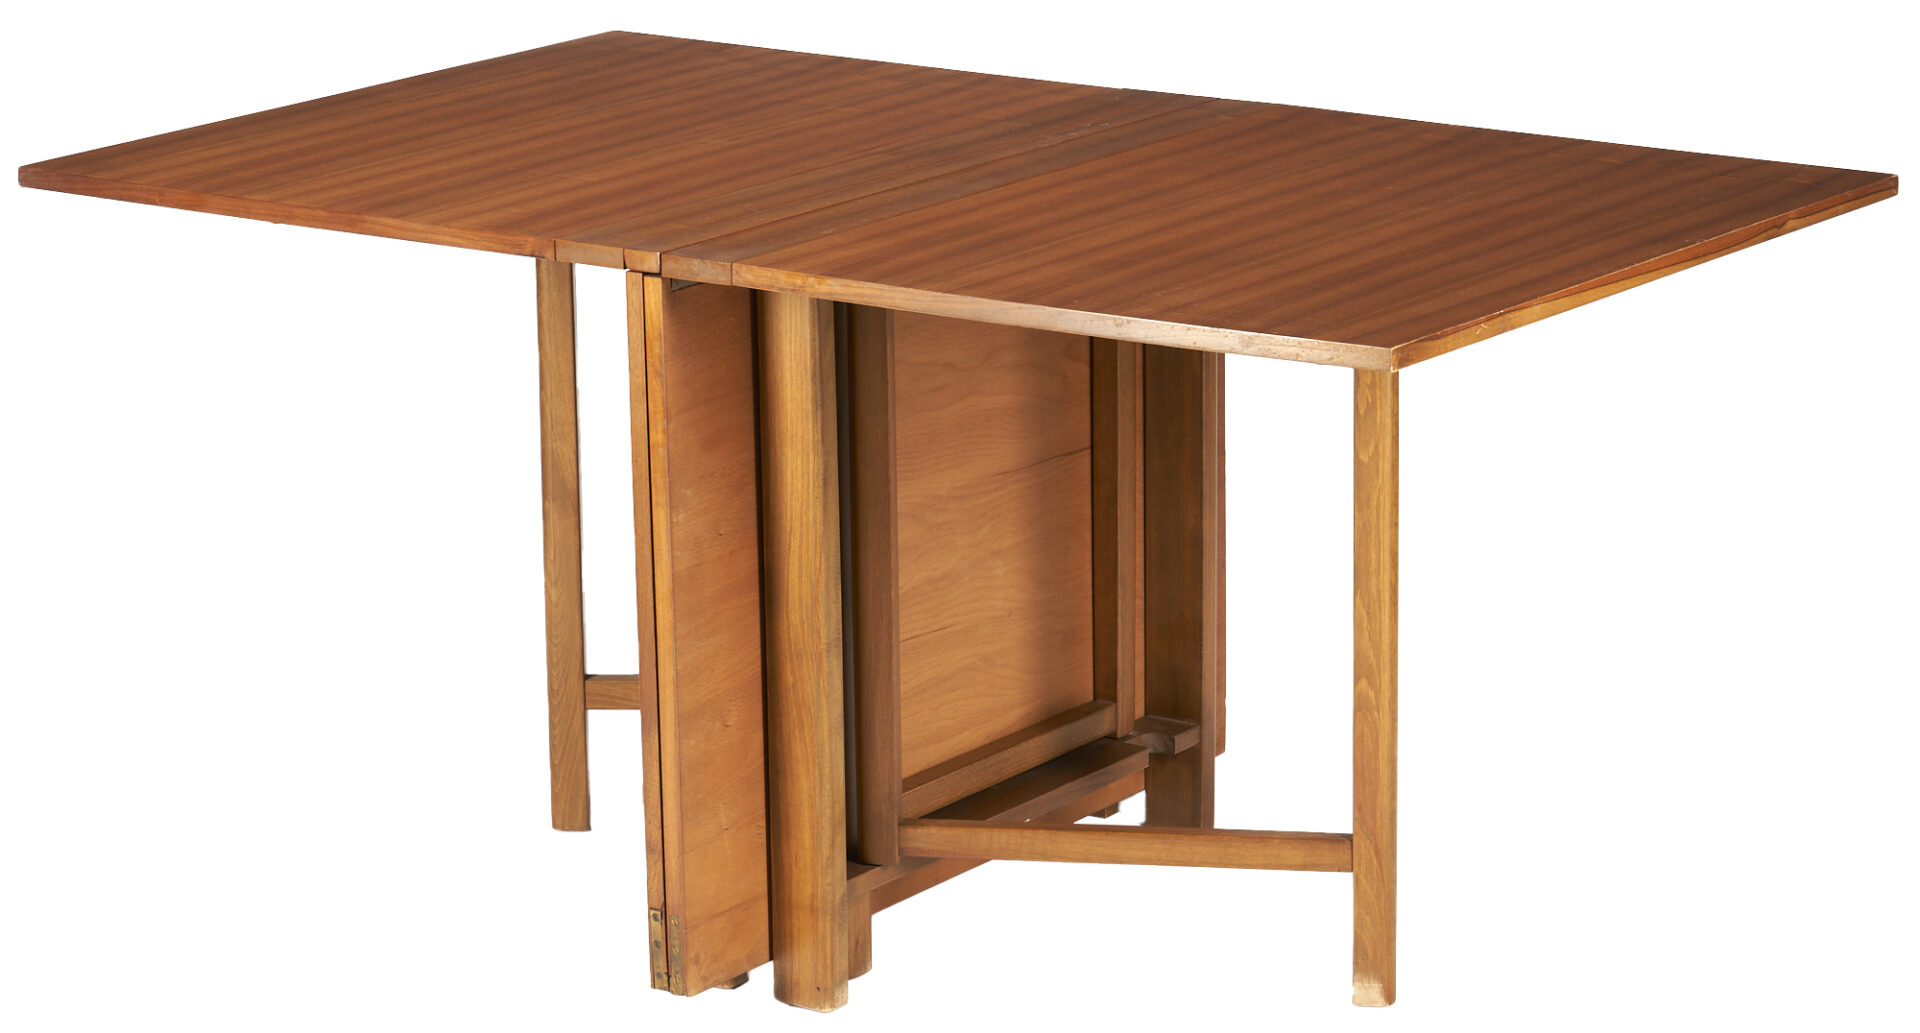 Lot 420: After Bruno Mathsson "Maria" Style Drop-Leaf Table